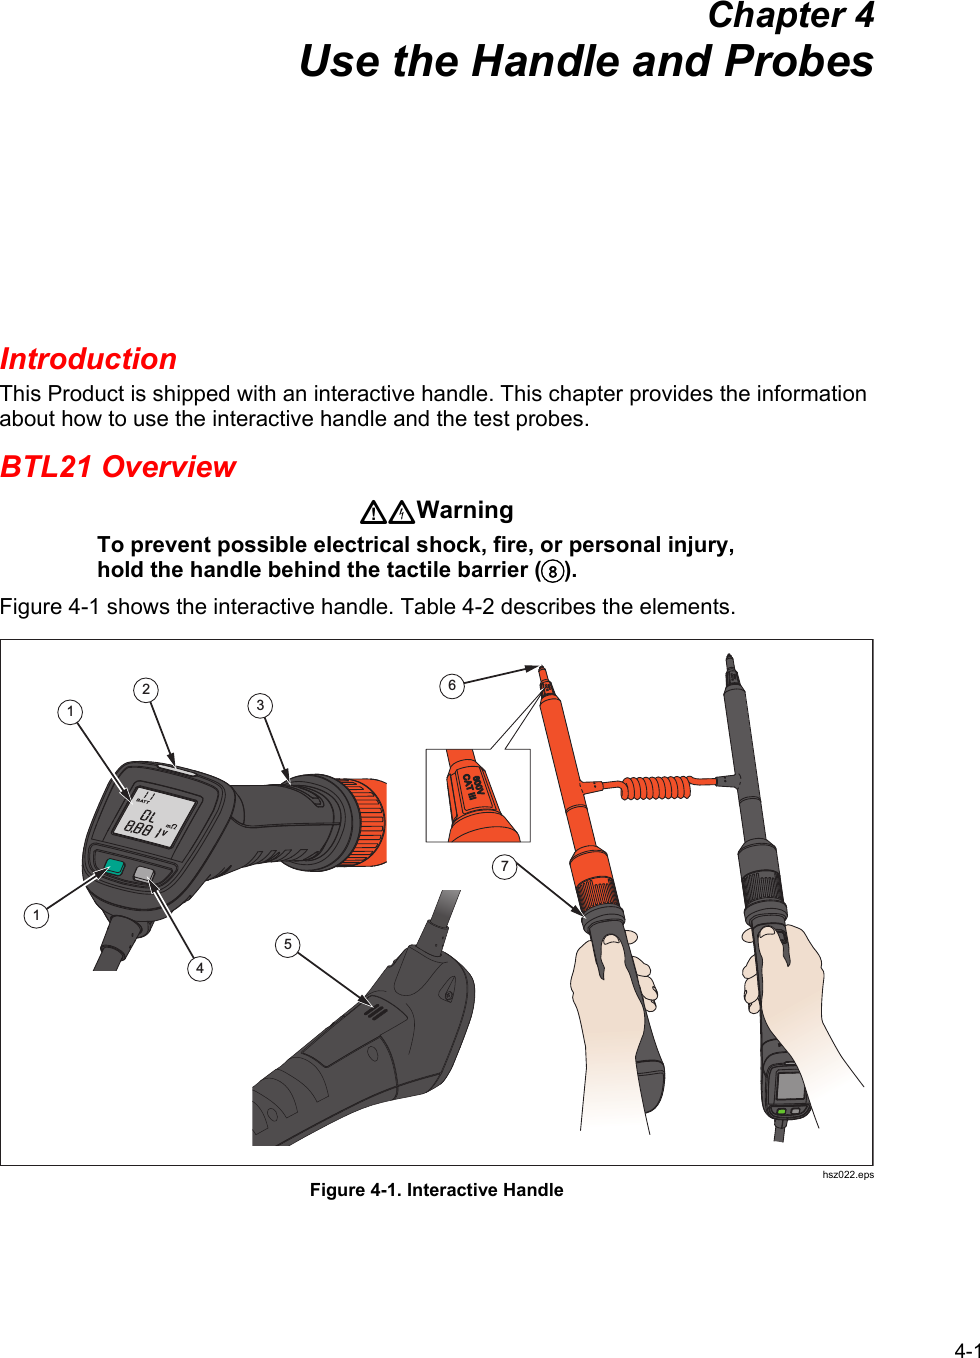 4-1 Chapter 4 Use the Handle and Probes Introduction This Product is shipped with an interactive handle. This chapter provides the information about how to use the interactive handle and the test probes. BTL21 Overview Warning To prevent possible electrical shock, fire, or personal injury, hold the handle behind the tactile barrier (). Figure 4-1 shows the interactive handle. Table 4-2 describes the elements. 32156714 hsz022.eps Figure 4-1. Interactive Handle    